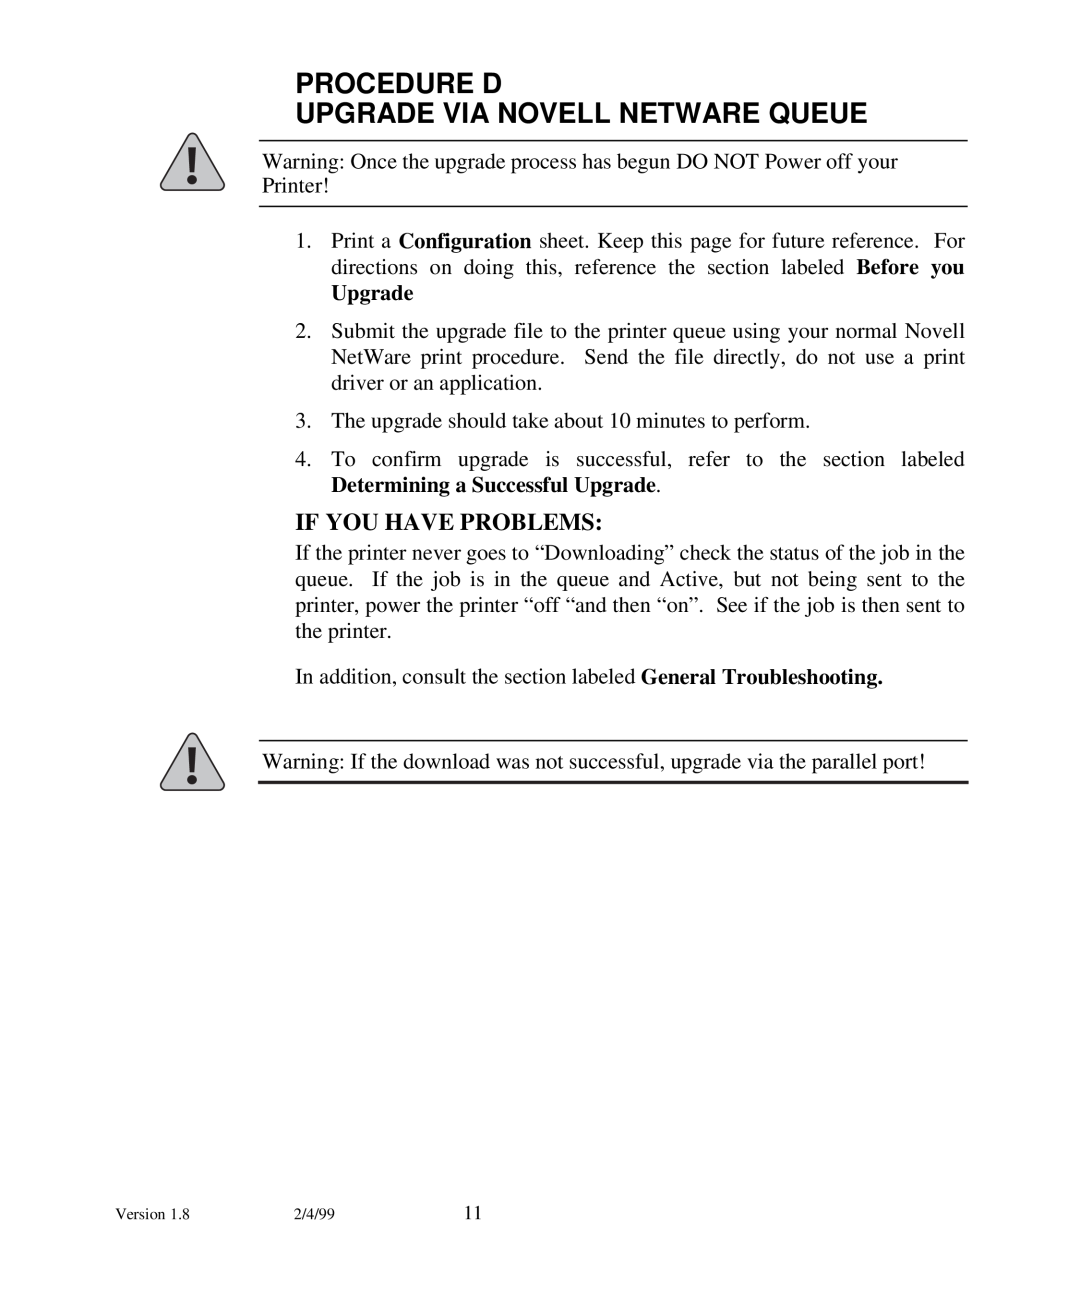 Xerox N17 manual Procedure D Upgrade Via Novell Netware Queue, If You Have Problems 